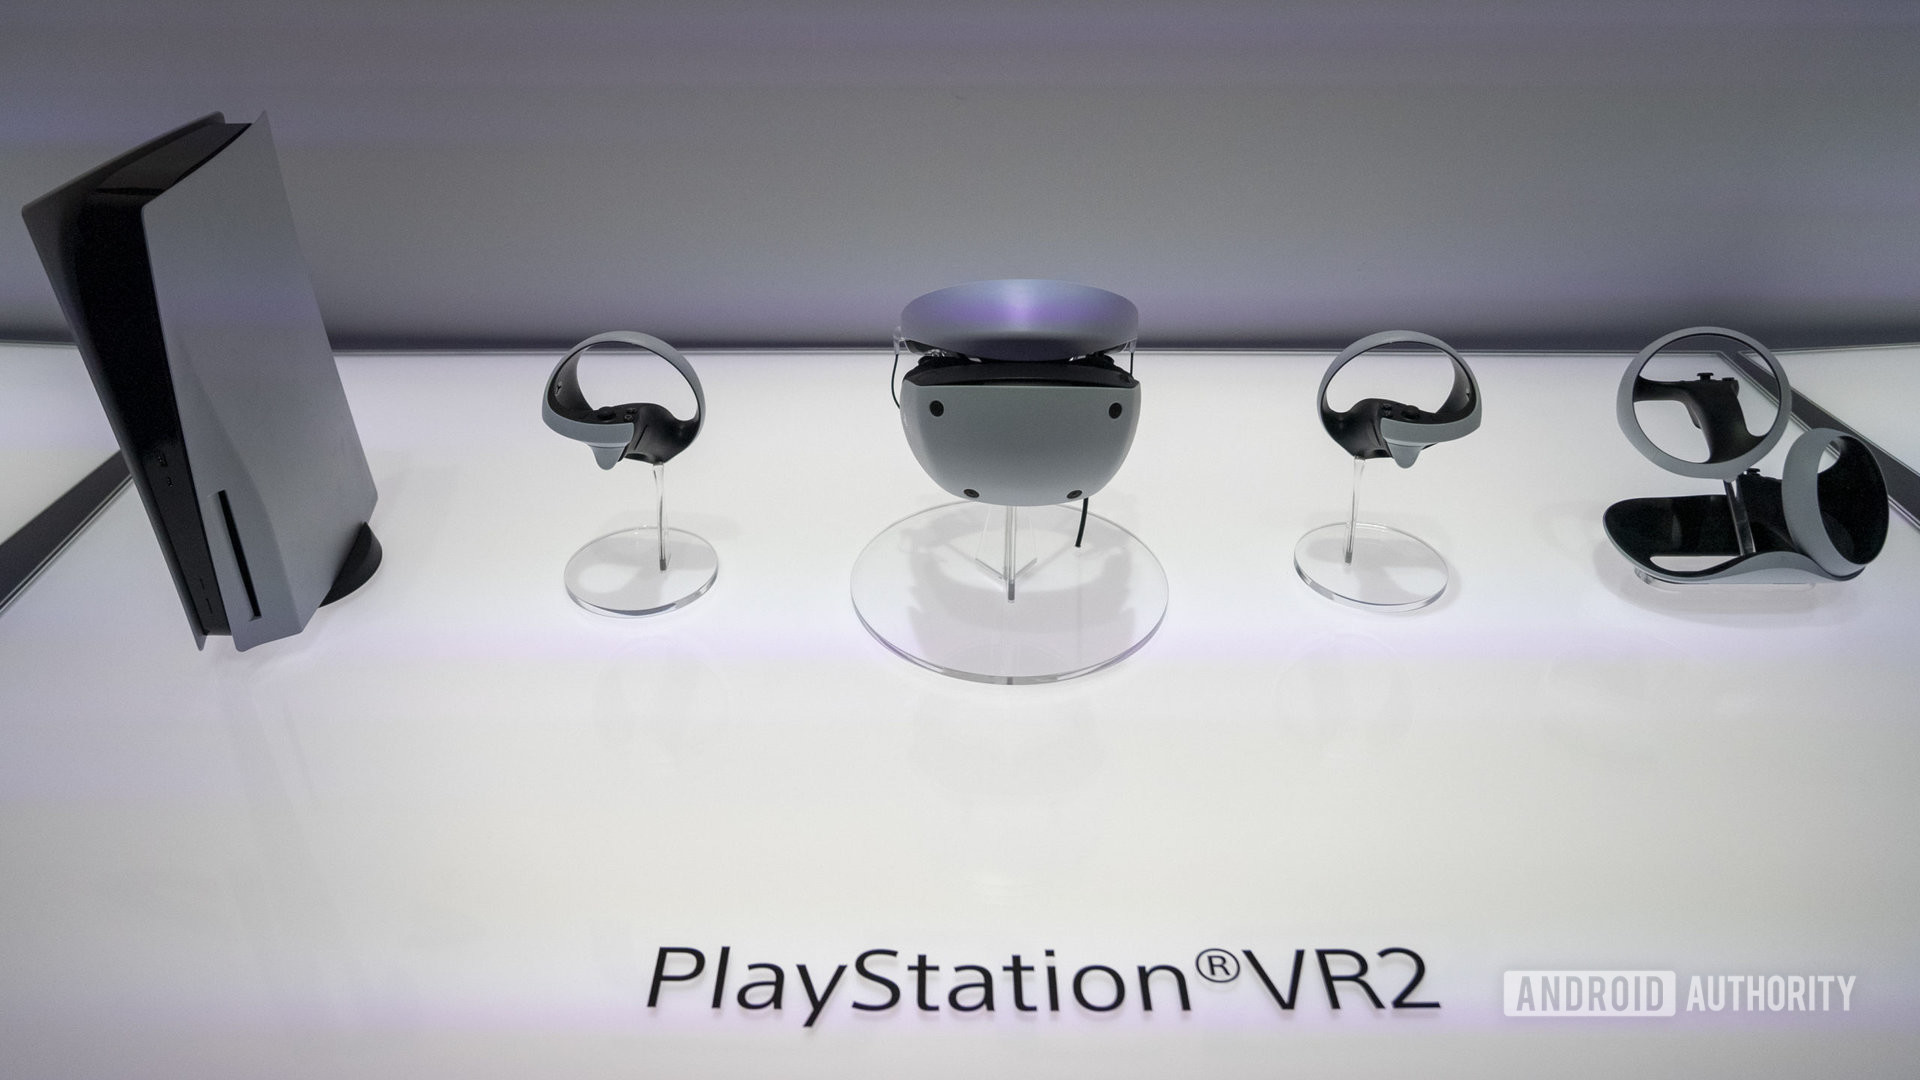 Sony Playstation VR2 Overview